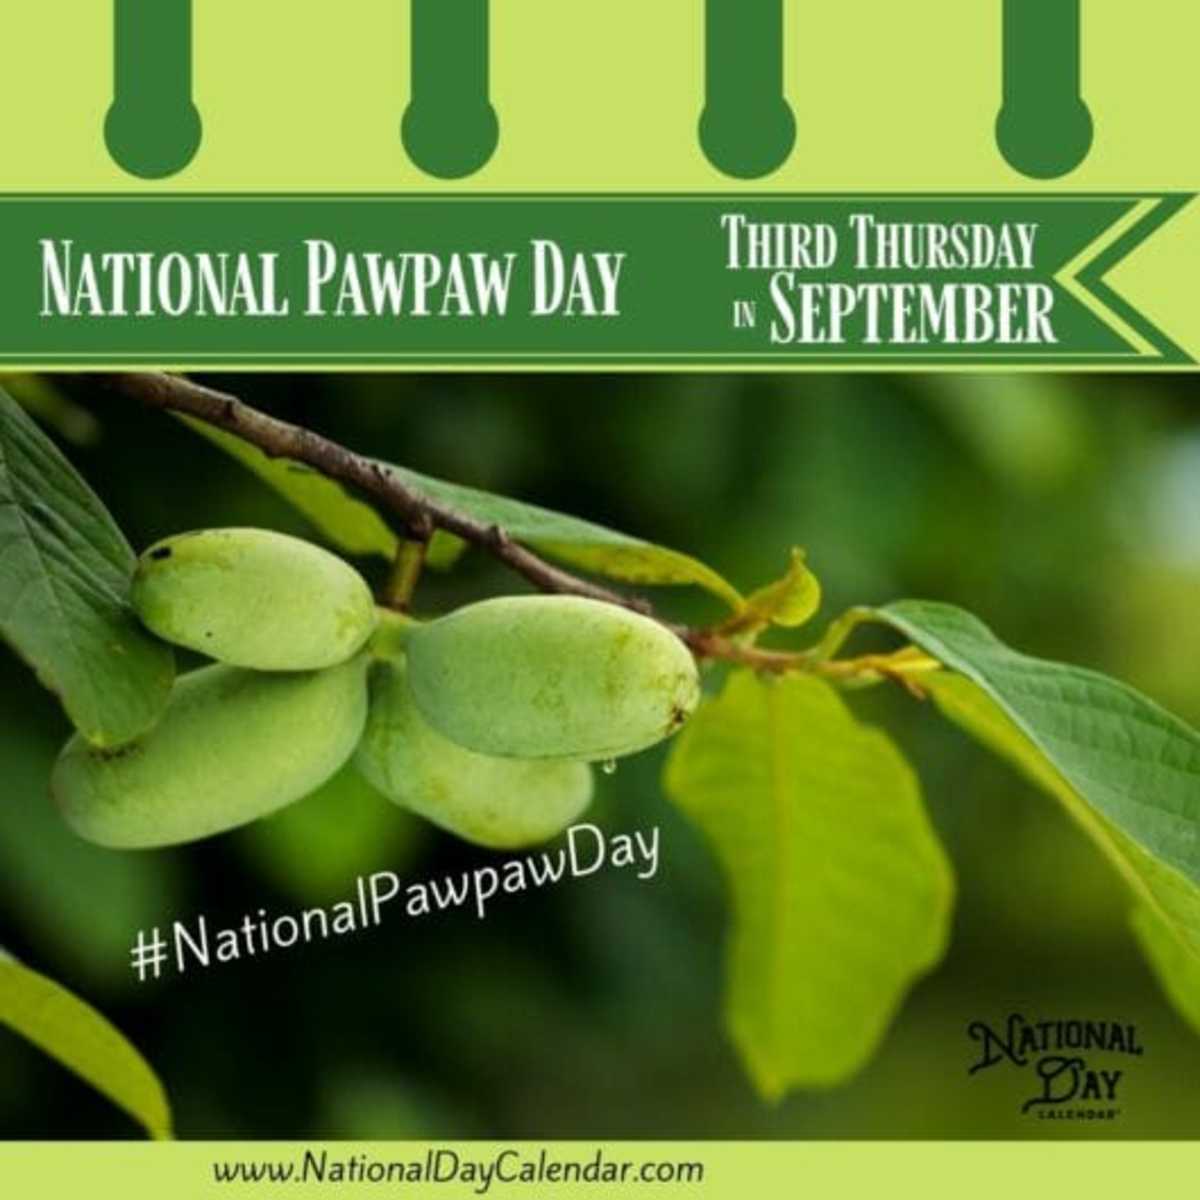 National Pawpaw Day - Third Thursday in September